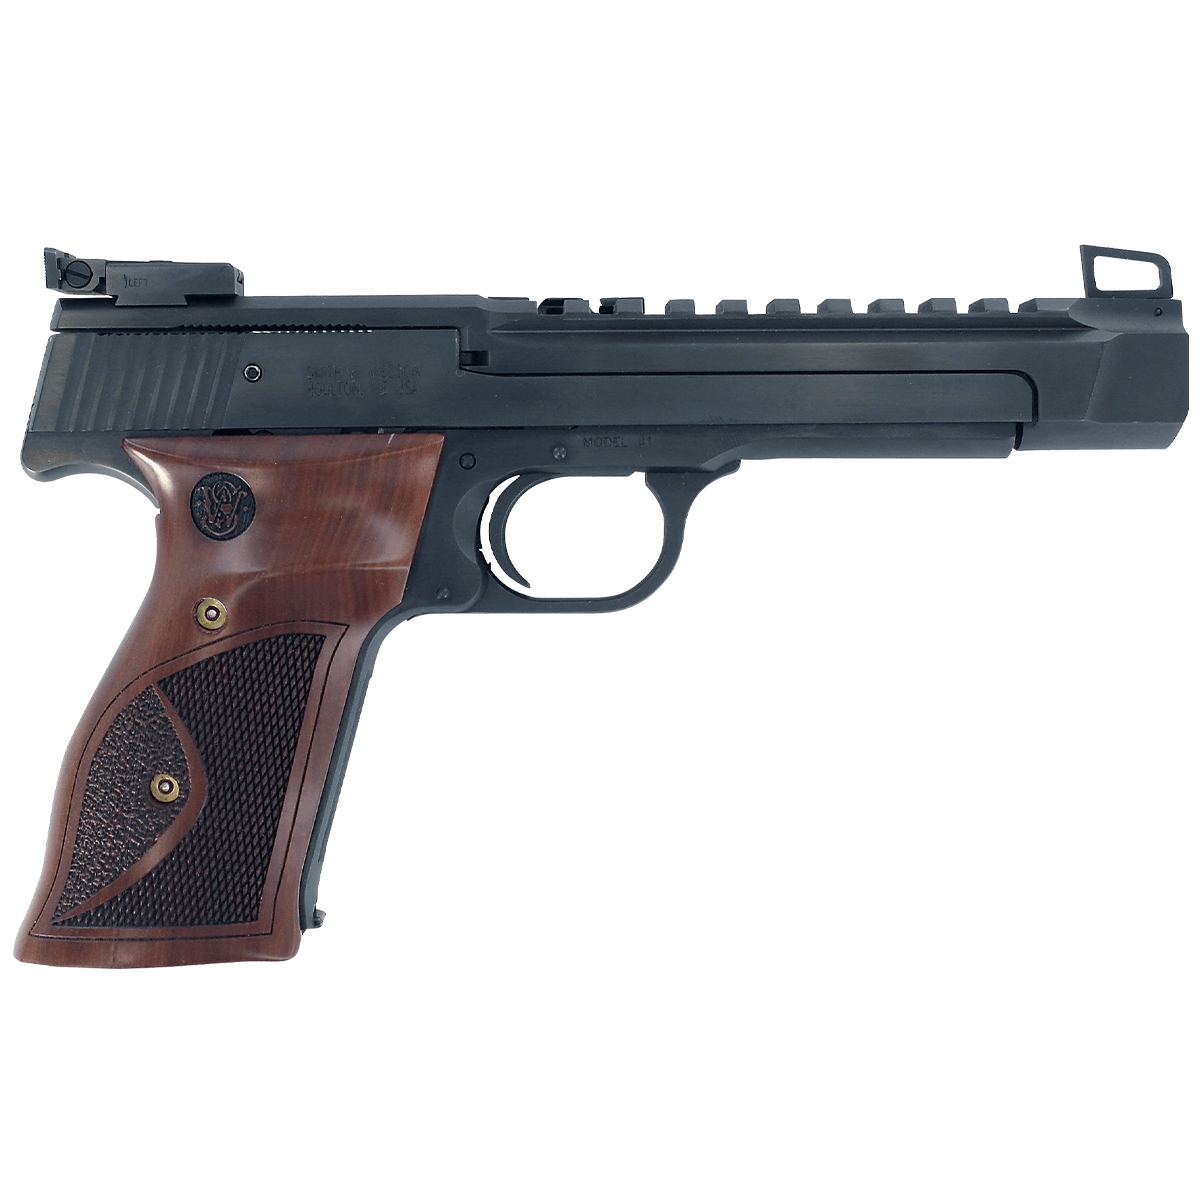 Smith & Wesson 178031 Smith & Wesson Model 41 22LR Target Pistol